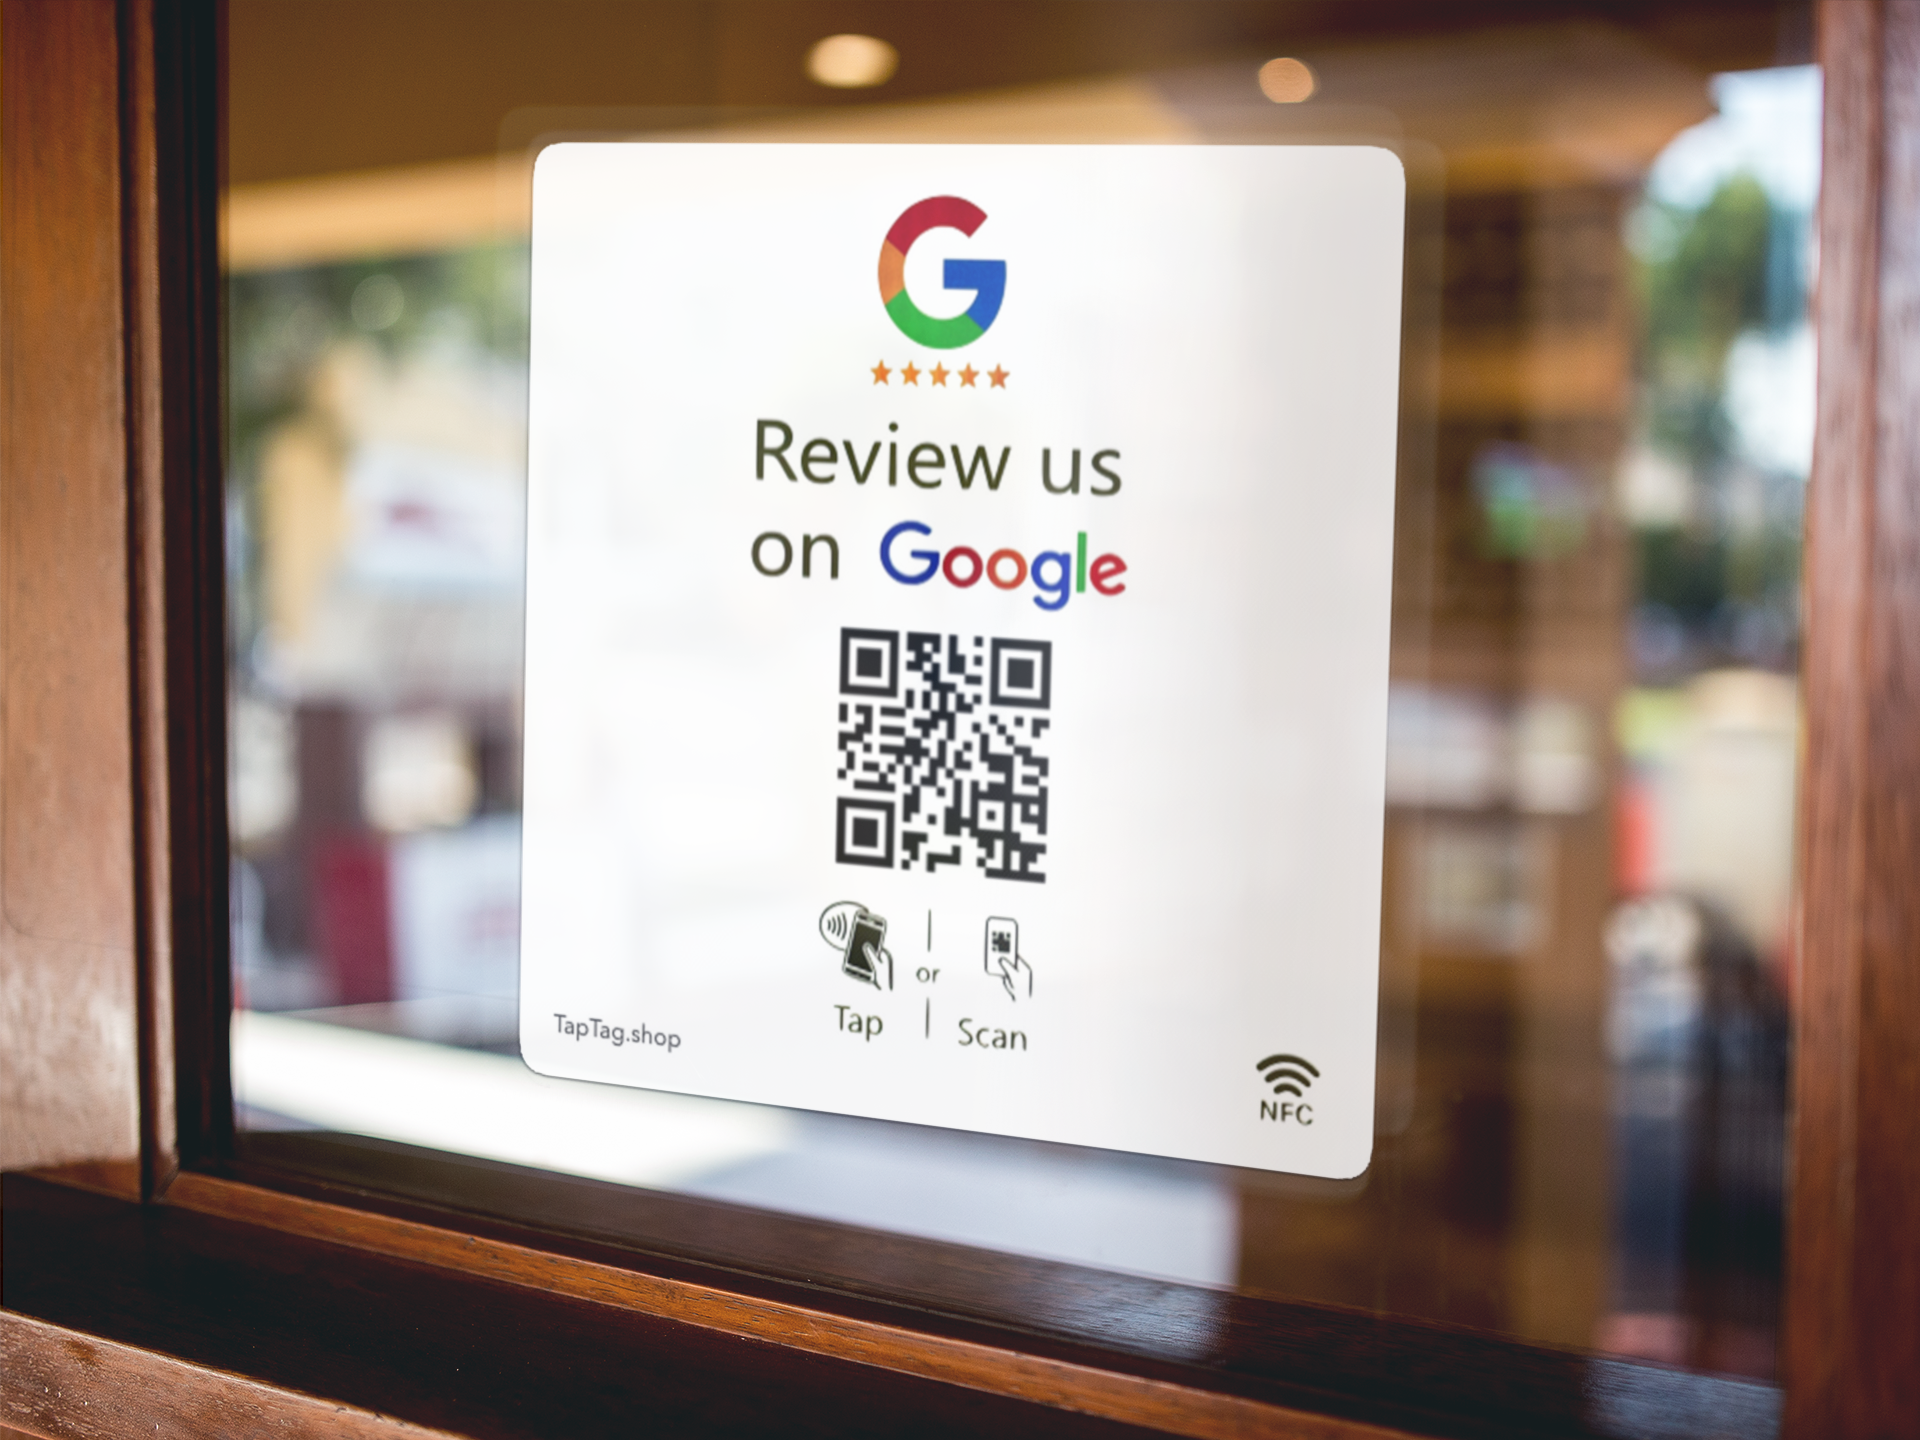 Tap / QR Window Review Sticker - Printed both sides